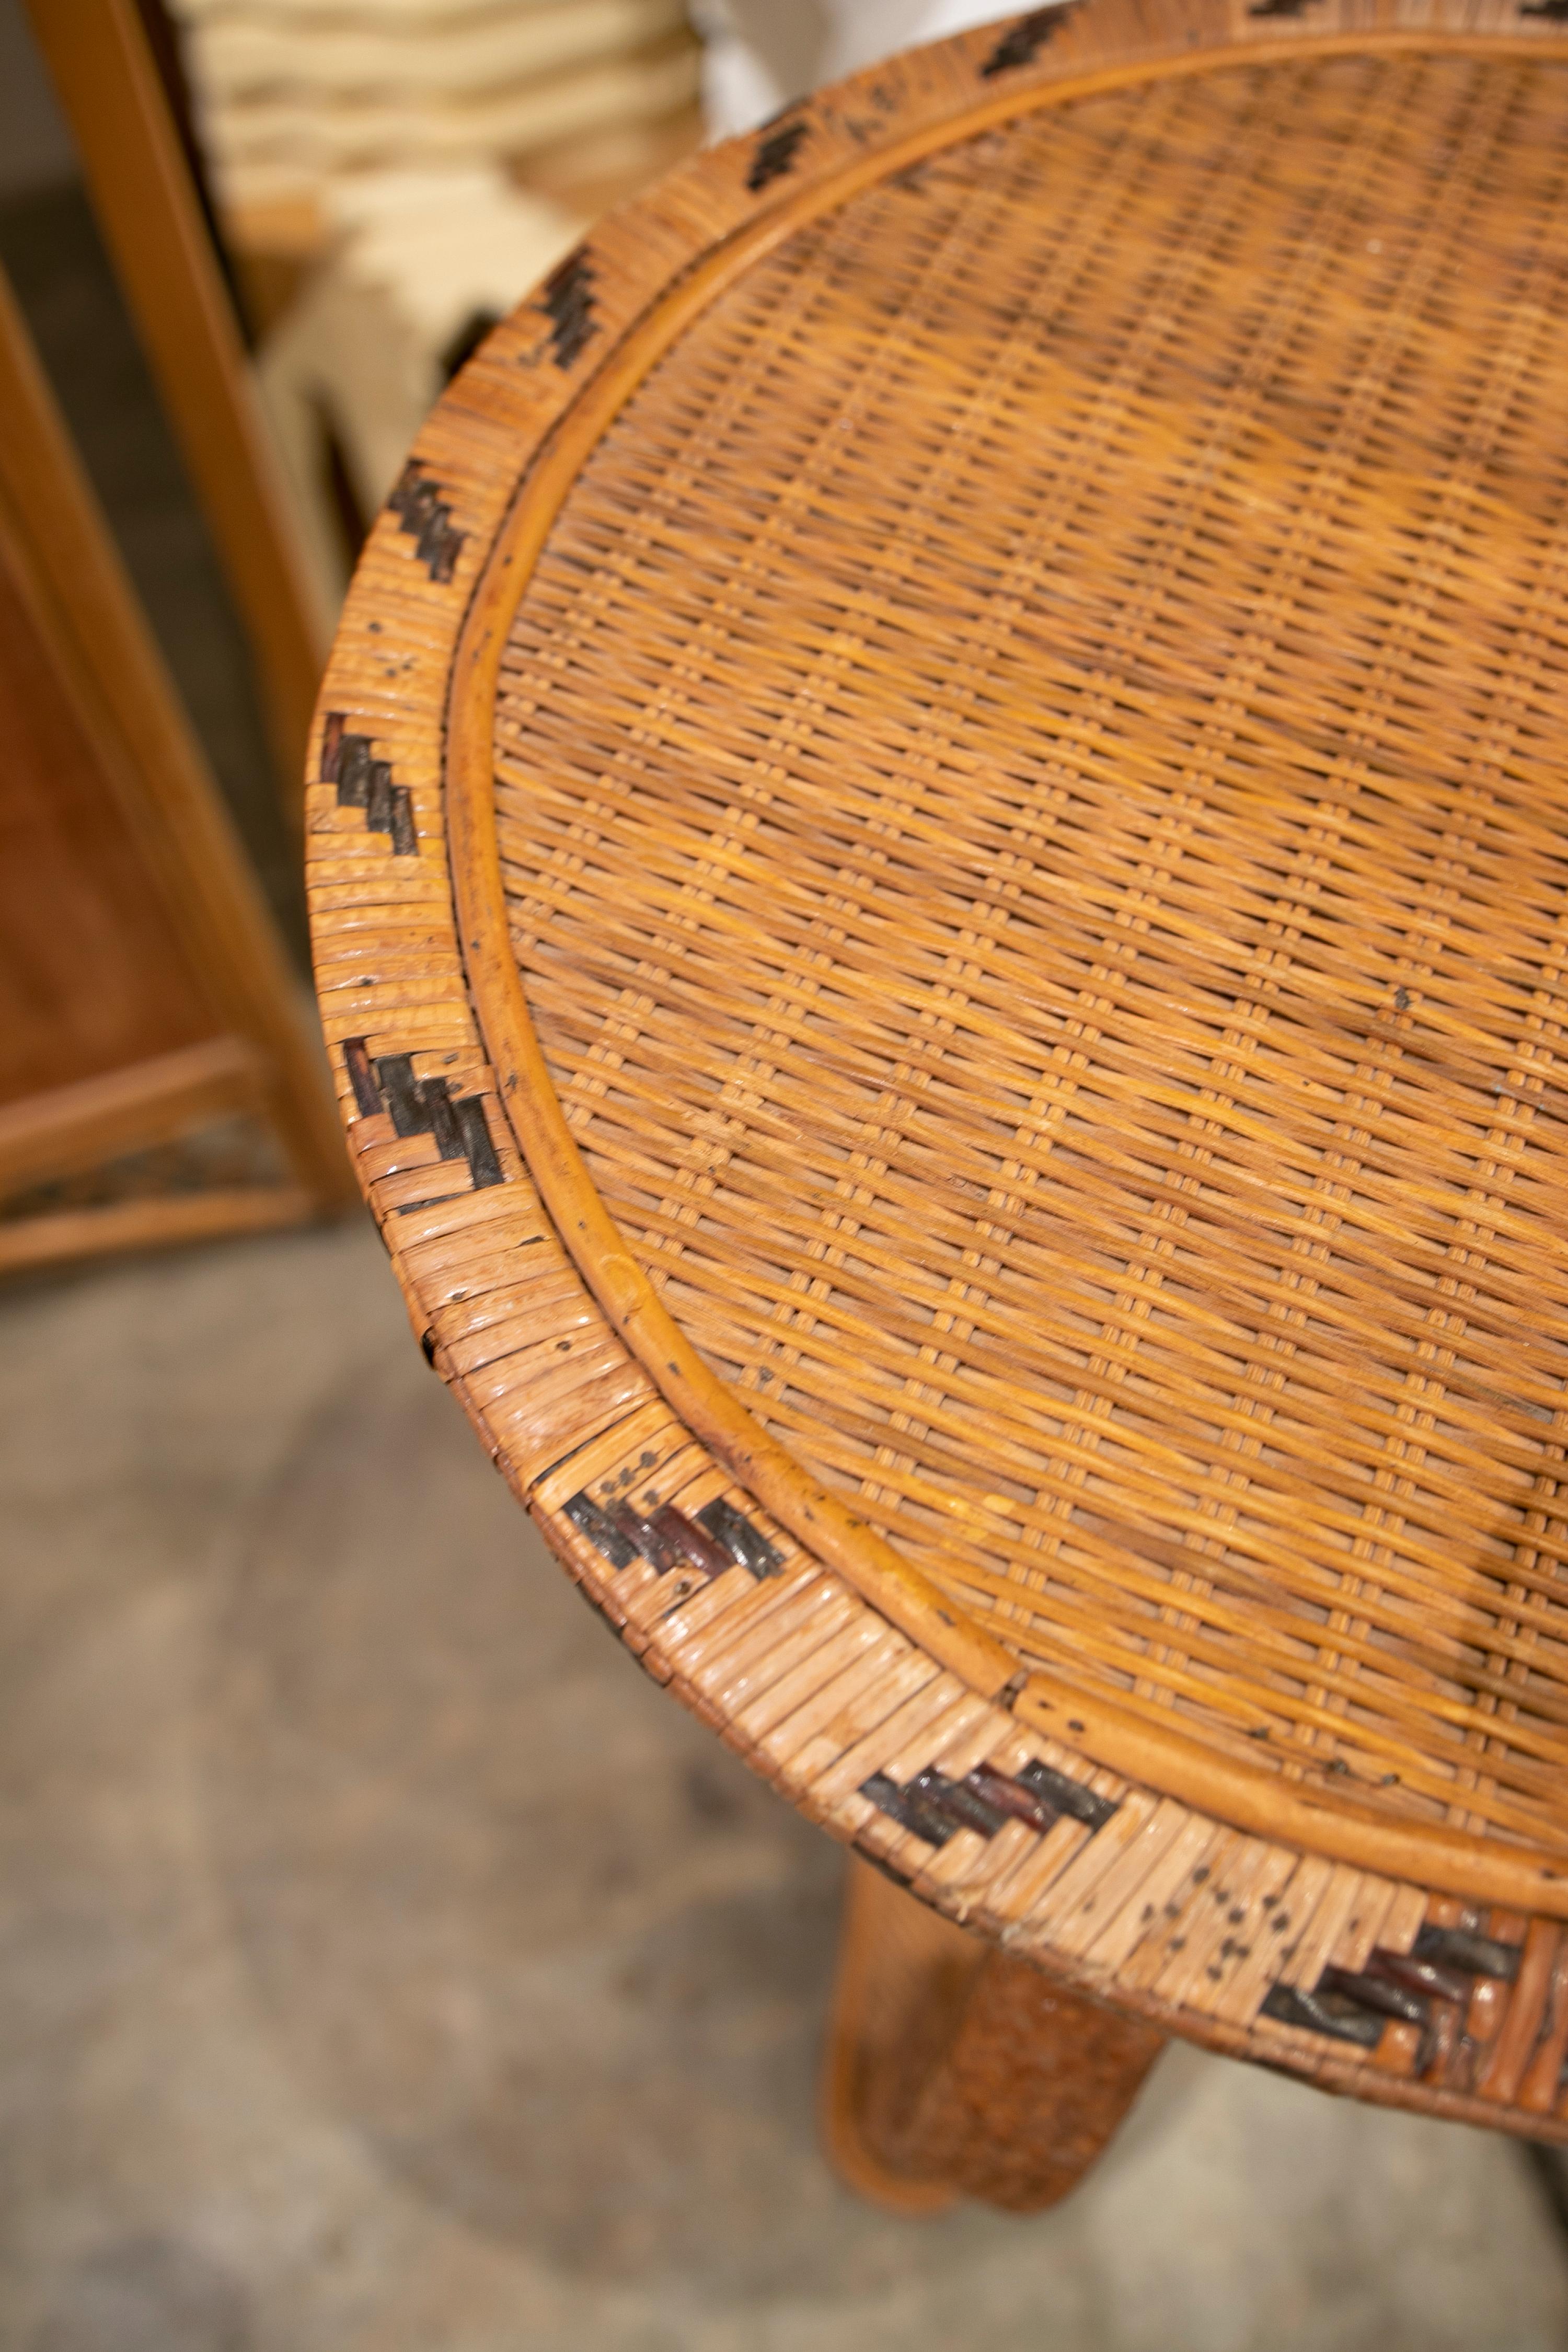 1970s Spanish Woven Wicker One Drawer Round Table 8